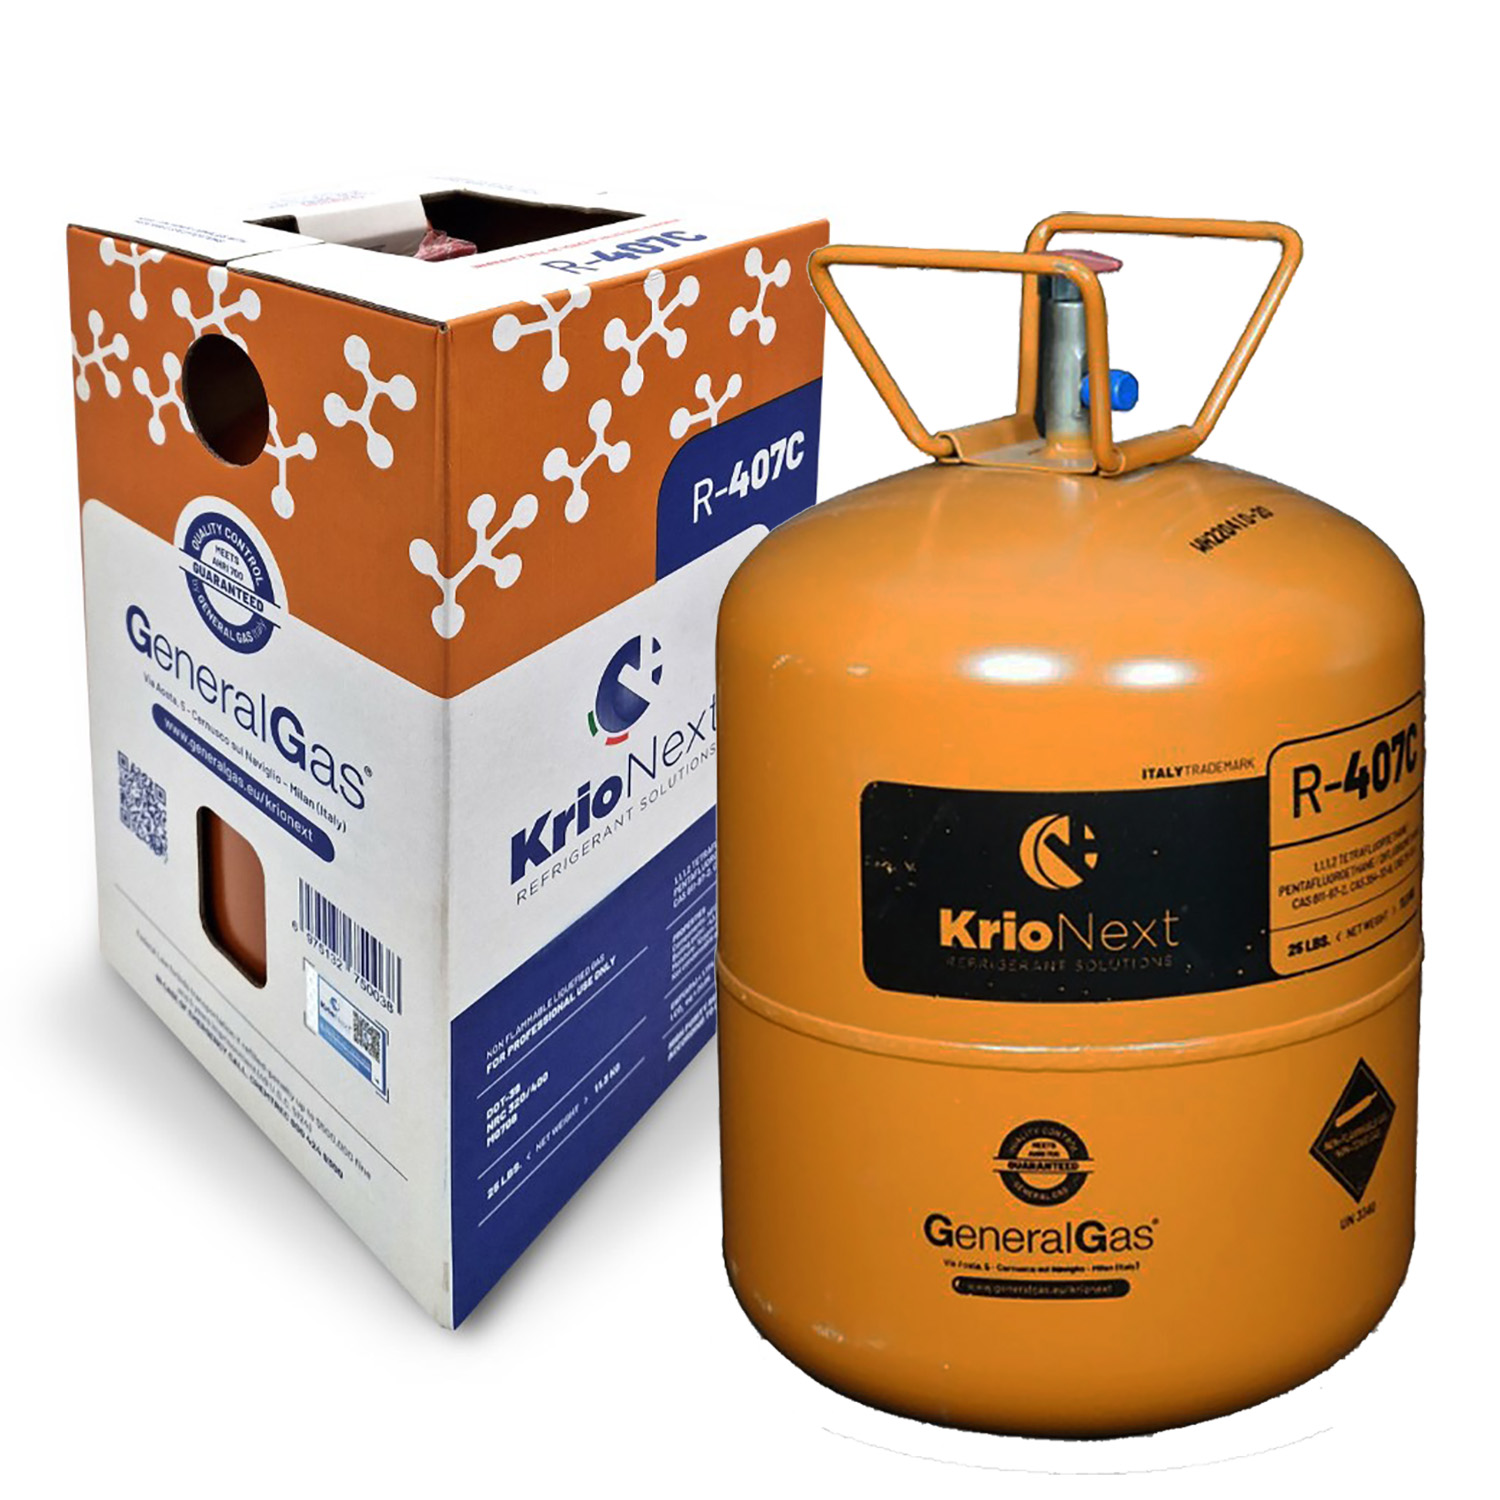 R407C KrioNext® 407C - DOT39 Non-refillable cylinder 13,77 Lt / 27 Bar - 11,3 kg/25 lb - Quality meets AHRI700-2019 USA standard (guaranteed by lab of GeneralGas Zhejiang Co. LTD.)